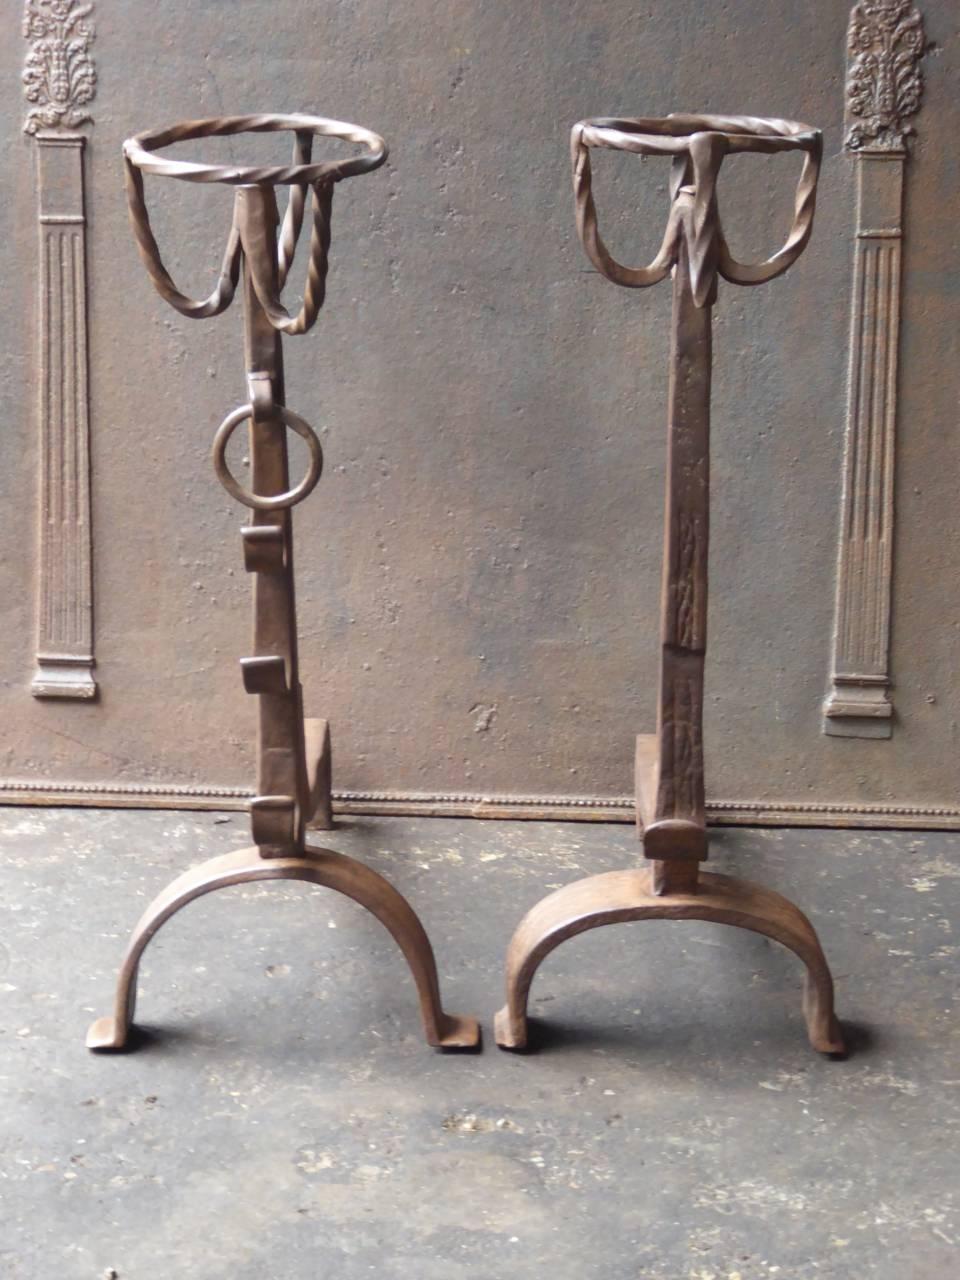 17th-18th century French Gothic andirons made of wrought iron.